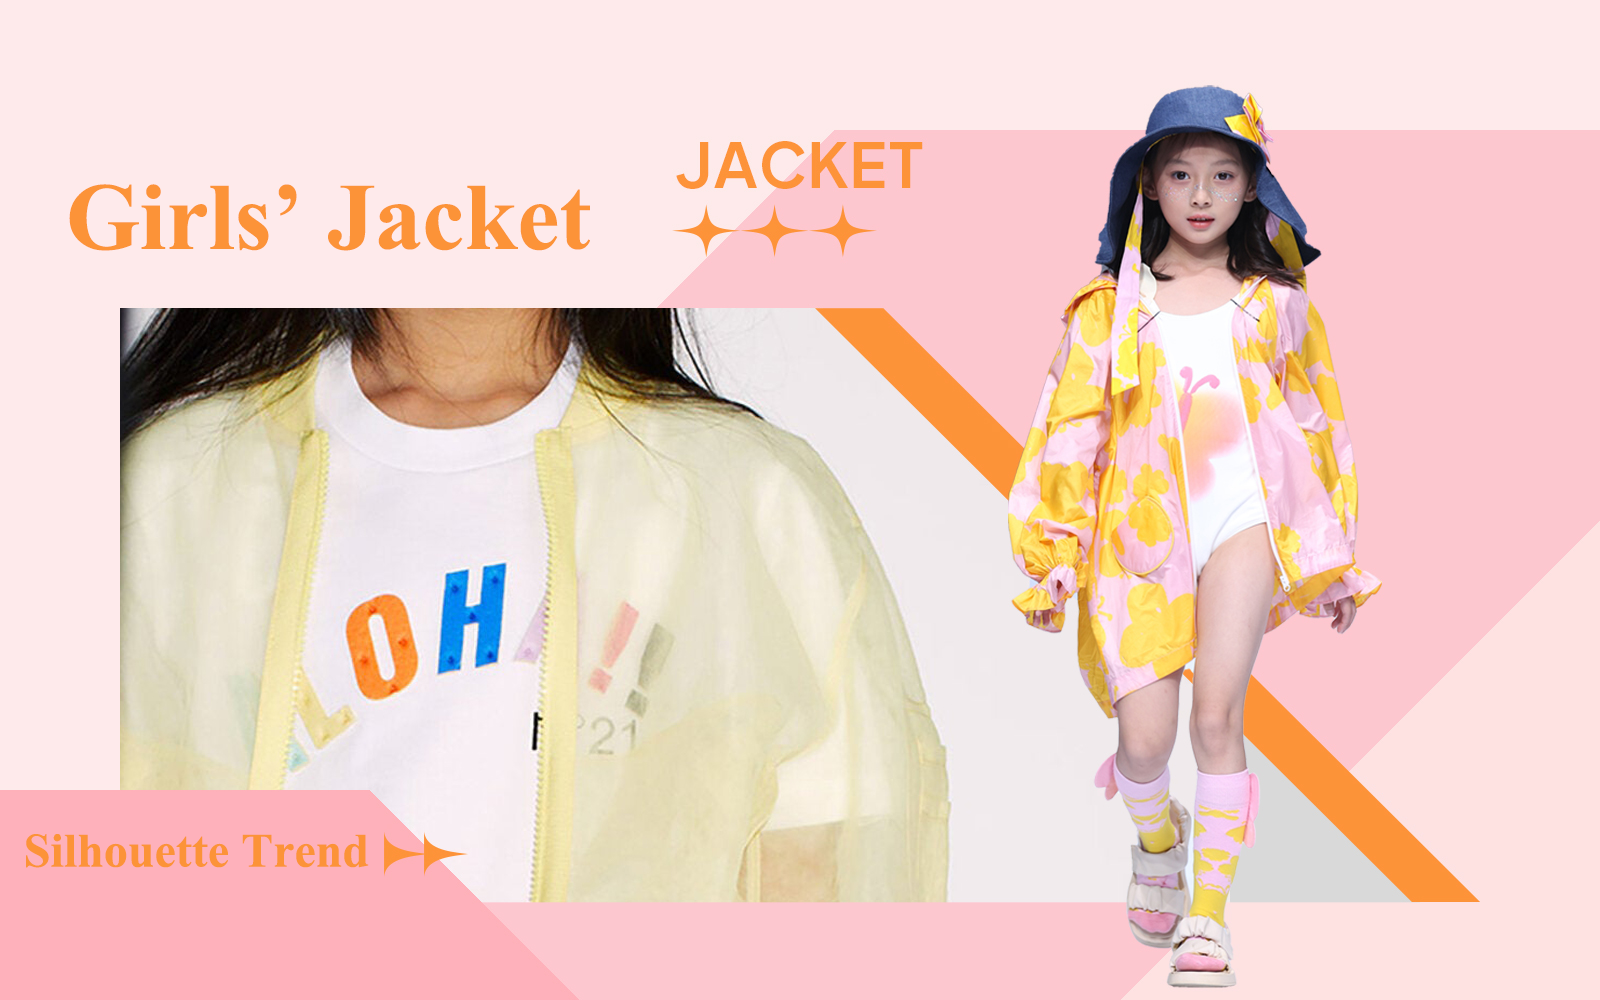 The Silhouette Trend for Girls' Jacket